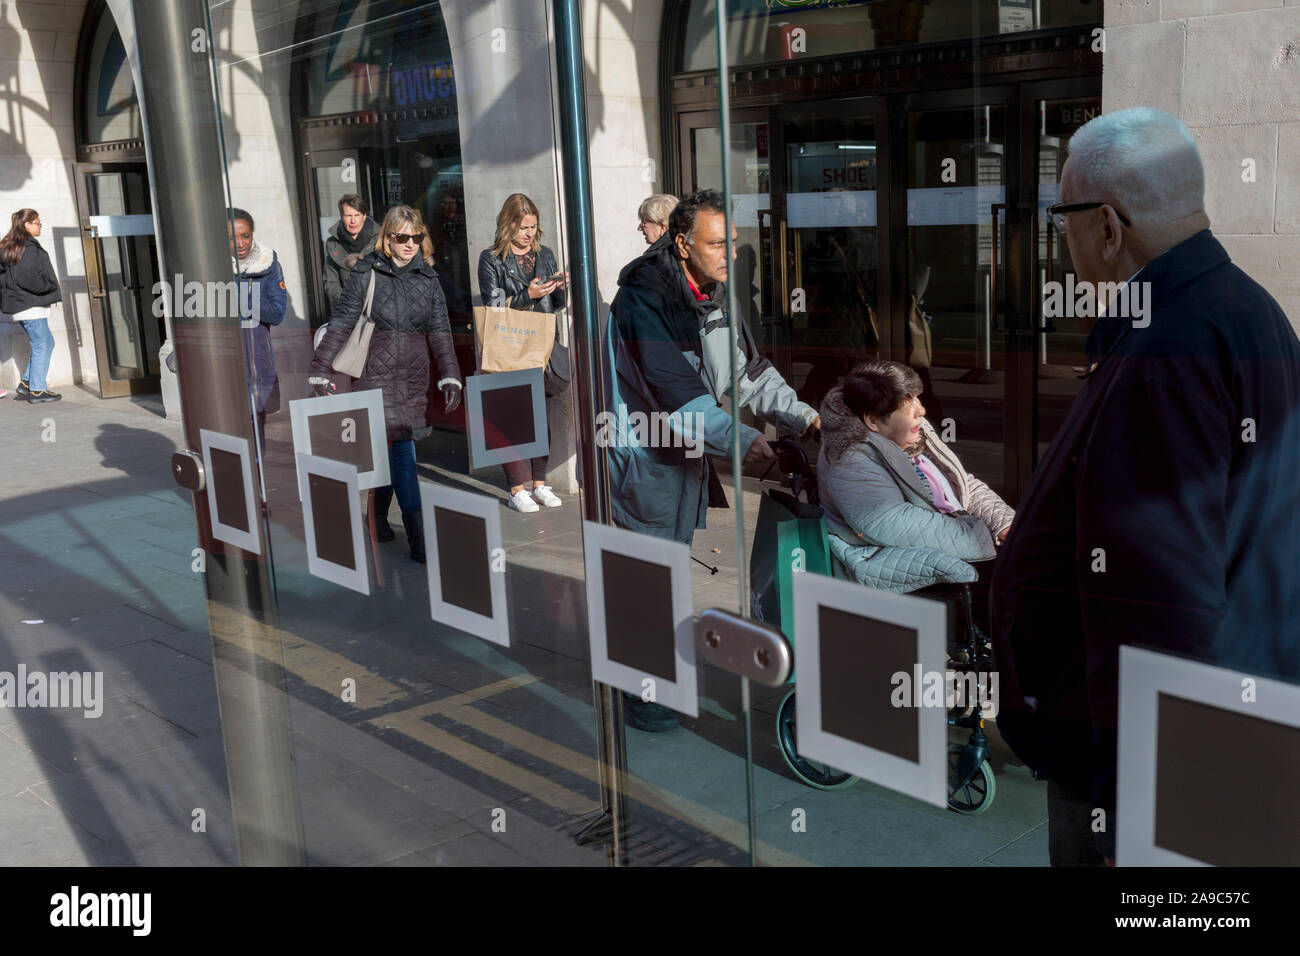 Londoners wait for the next bus service at a bus stop in Kingston town centre, on 13th November 2019, in London, England. Stock Photo